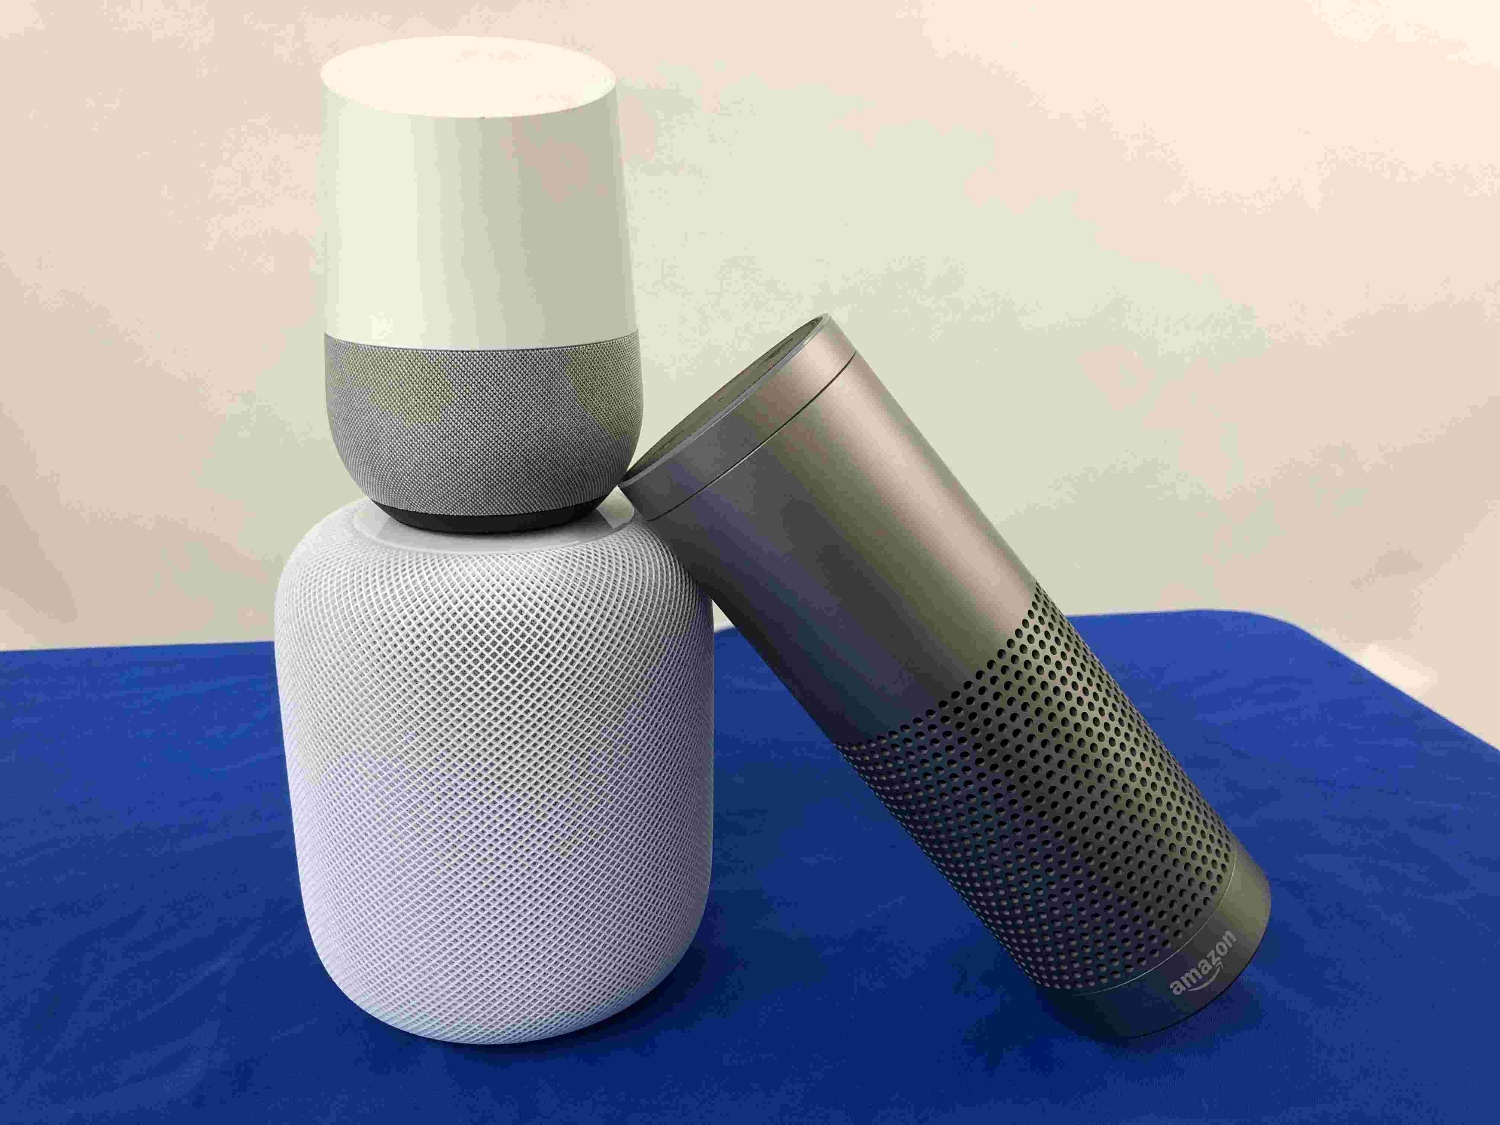 Amazon Echo, Apple HomePod or Google Home: which is smarter about playing music? We tested them